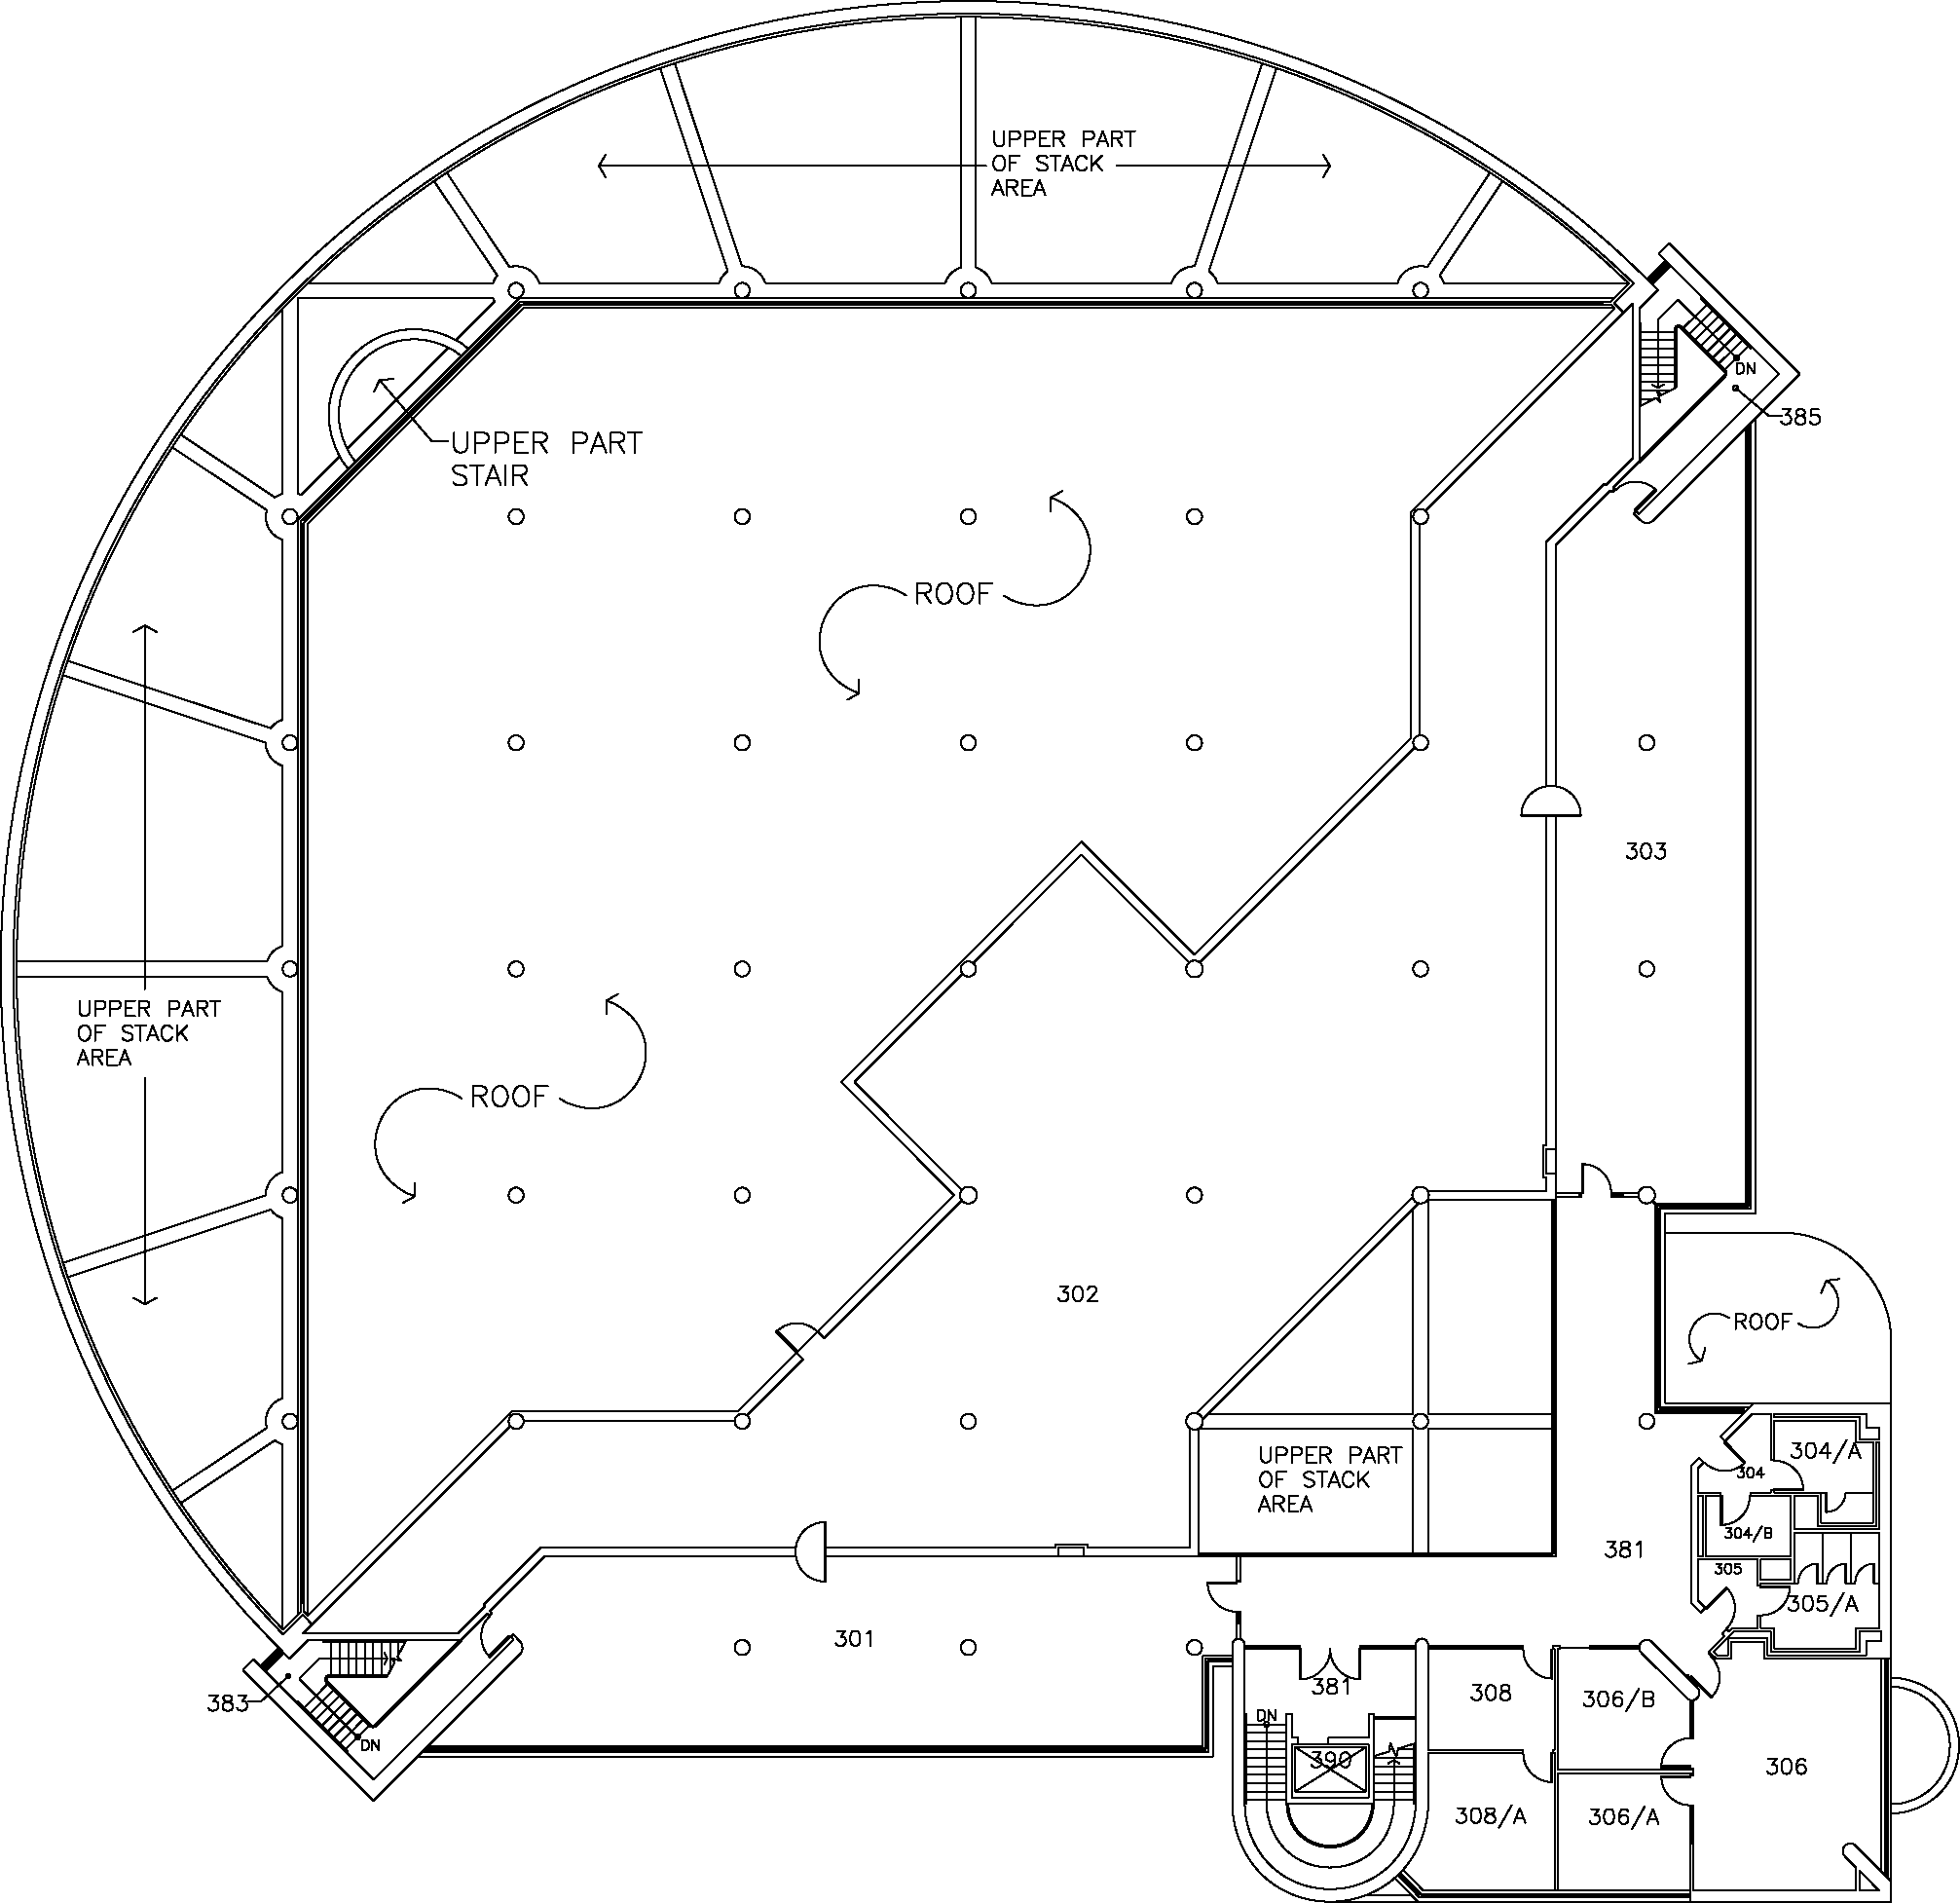 HG Thode Library - Third Floor Map